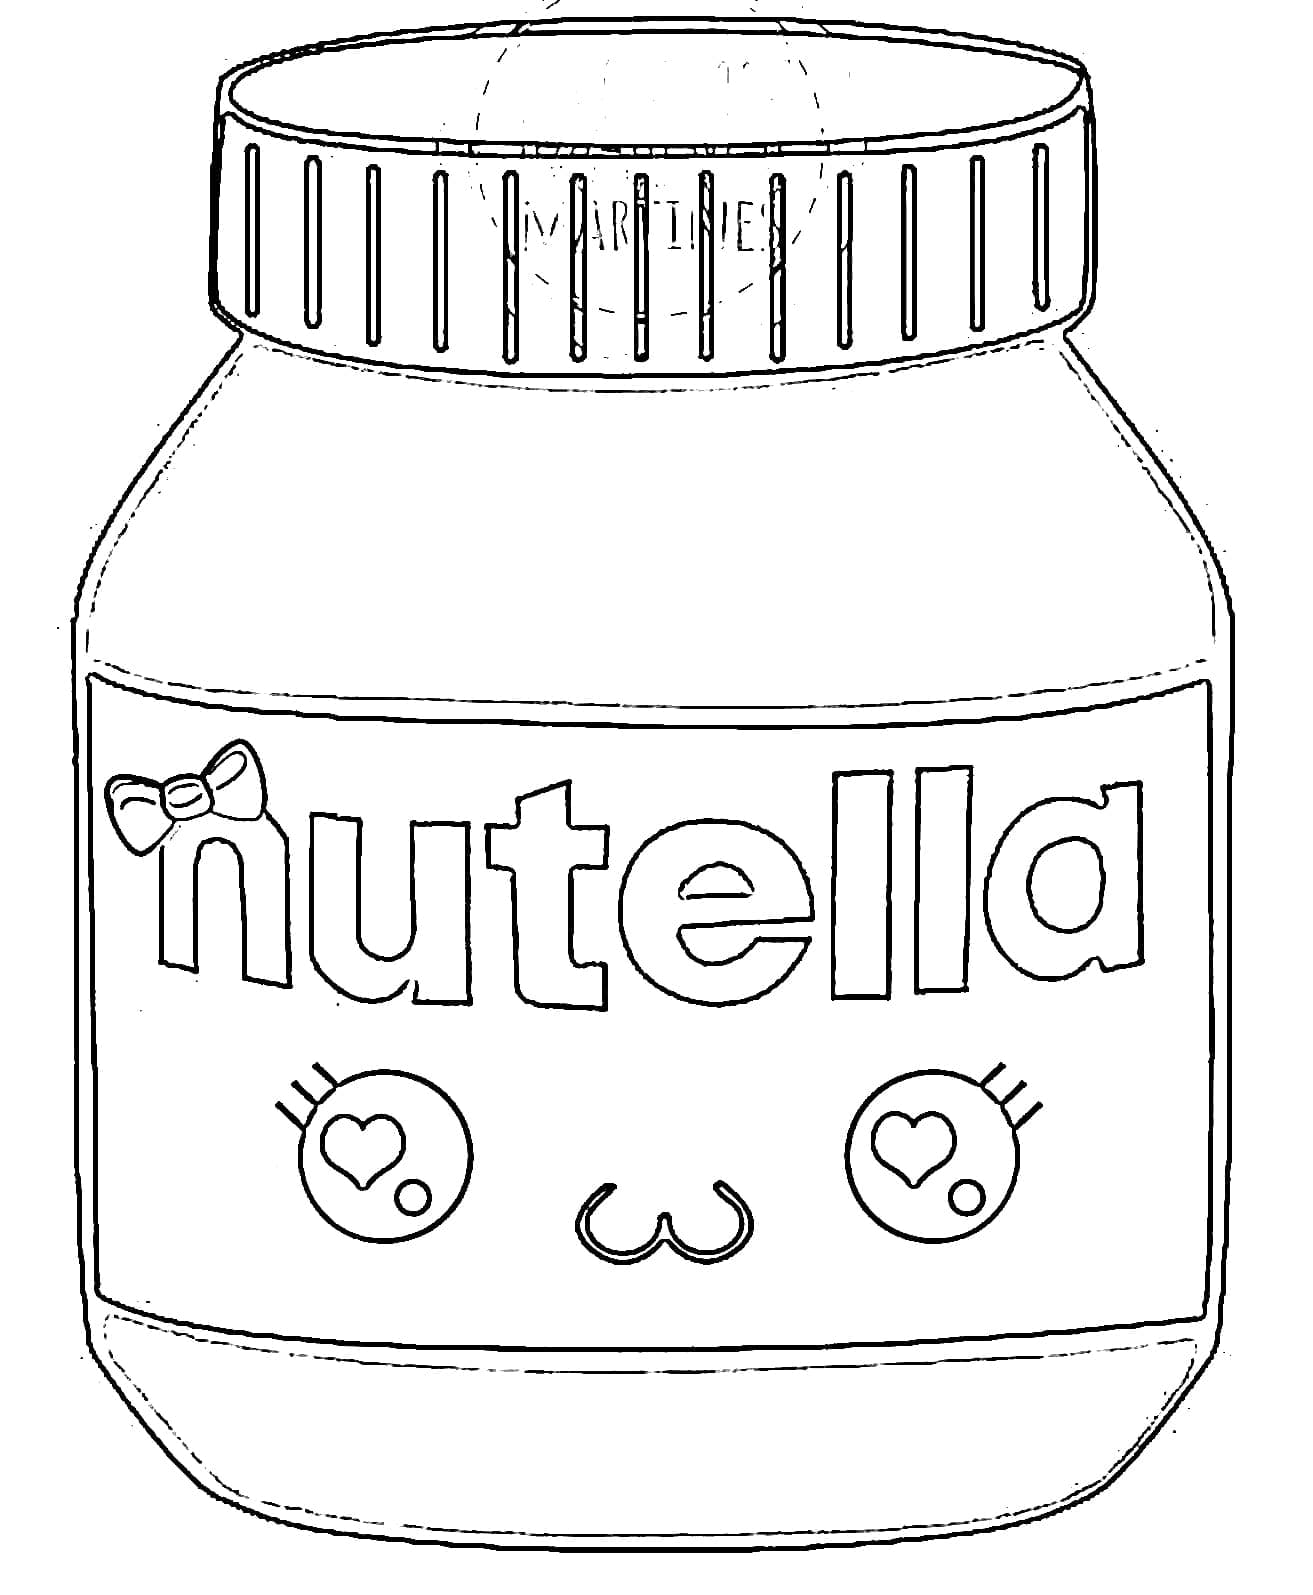 Kawaii Nutella 20 Coloring Page   Free Printable Coloring Pages for ...